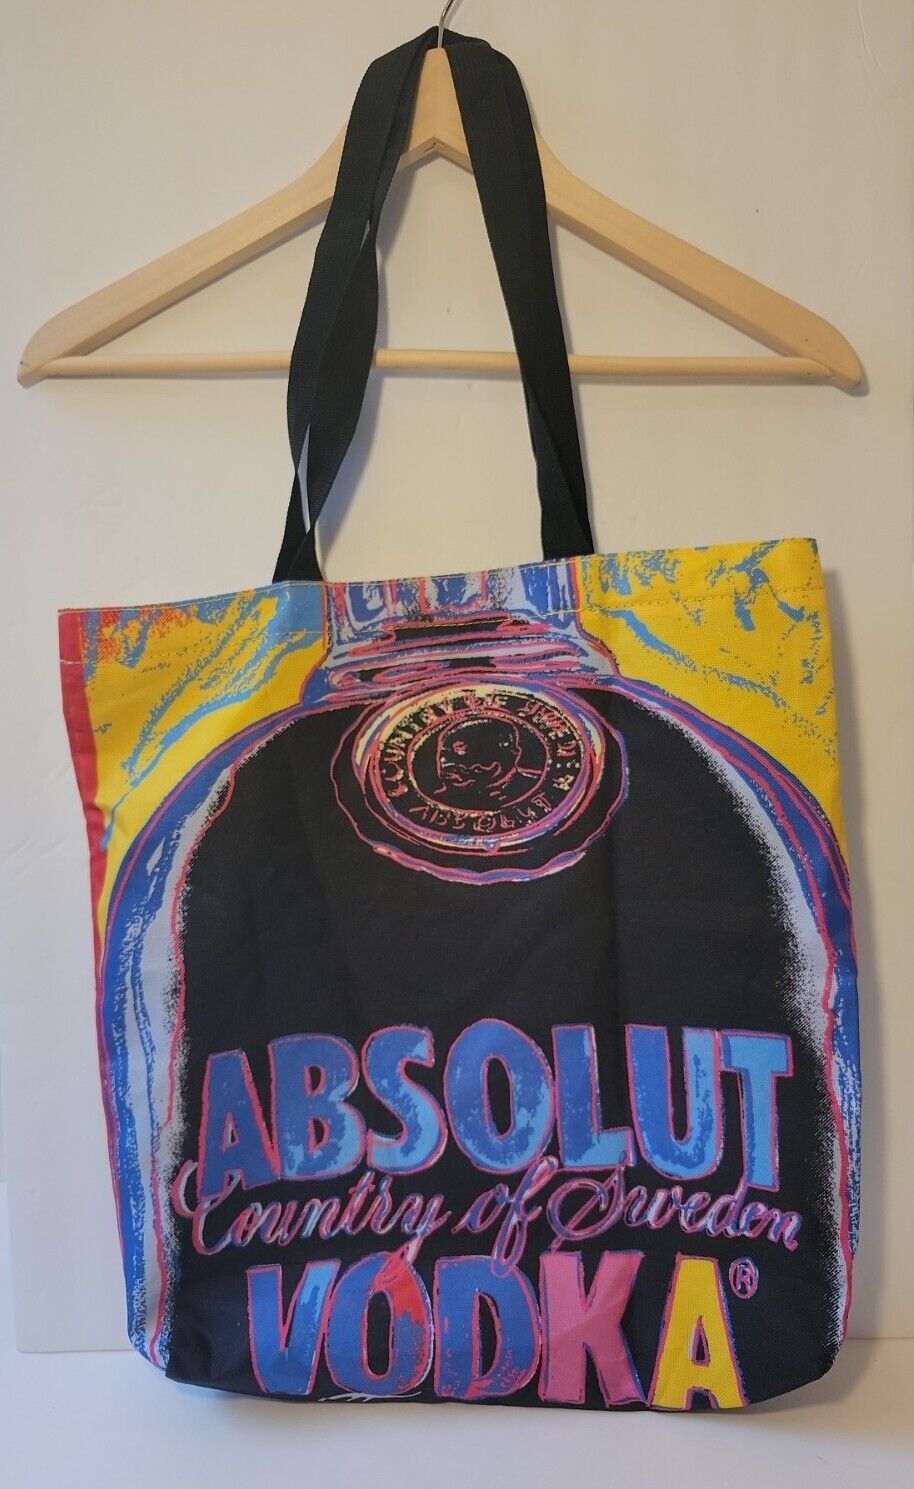 Andy Warhol Foundation Visual Arts Absolute Vodka Tote Bag Country Of Sweden